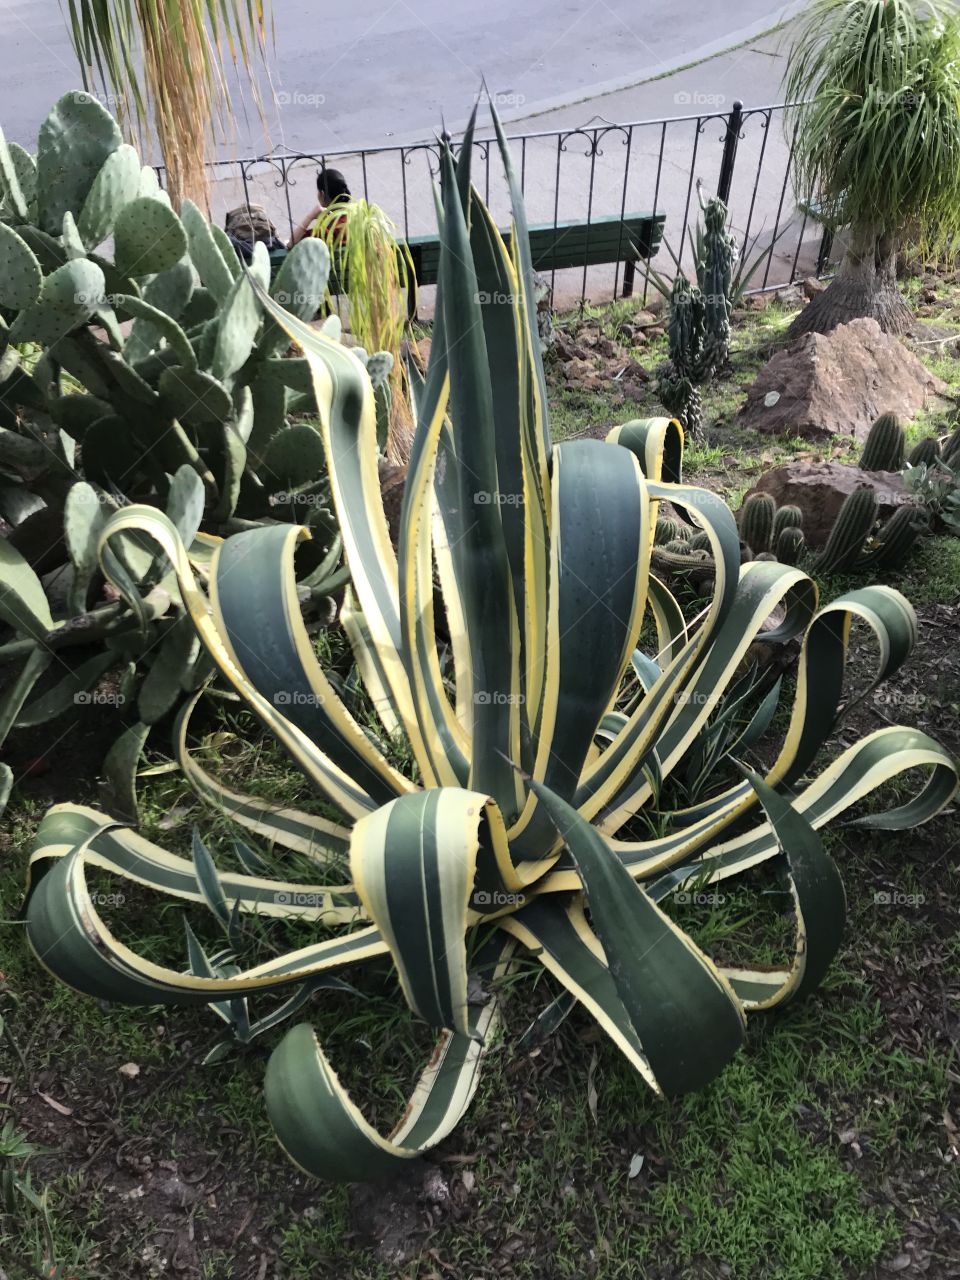 Interesting plant that needed recognition